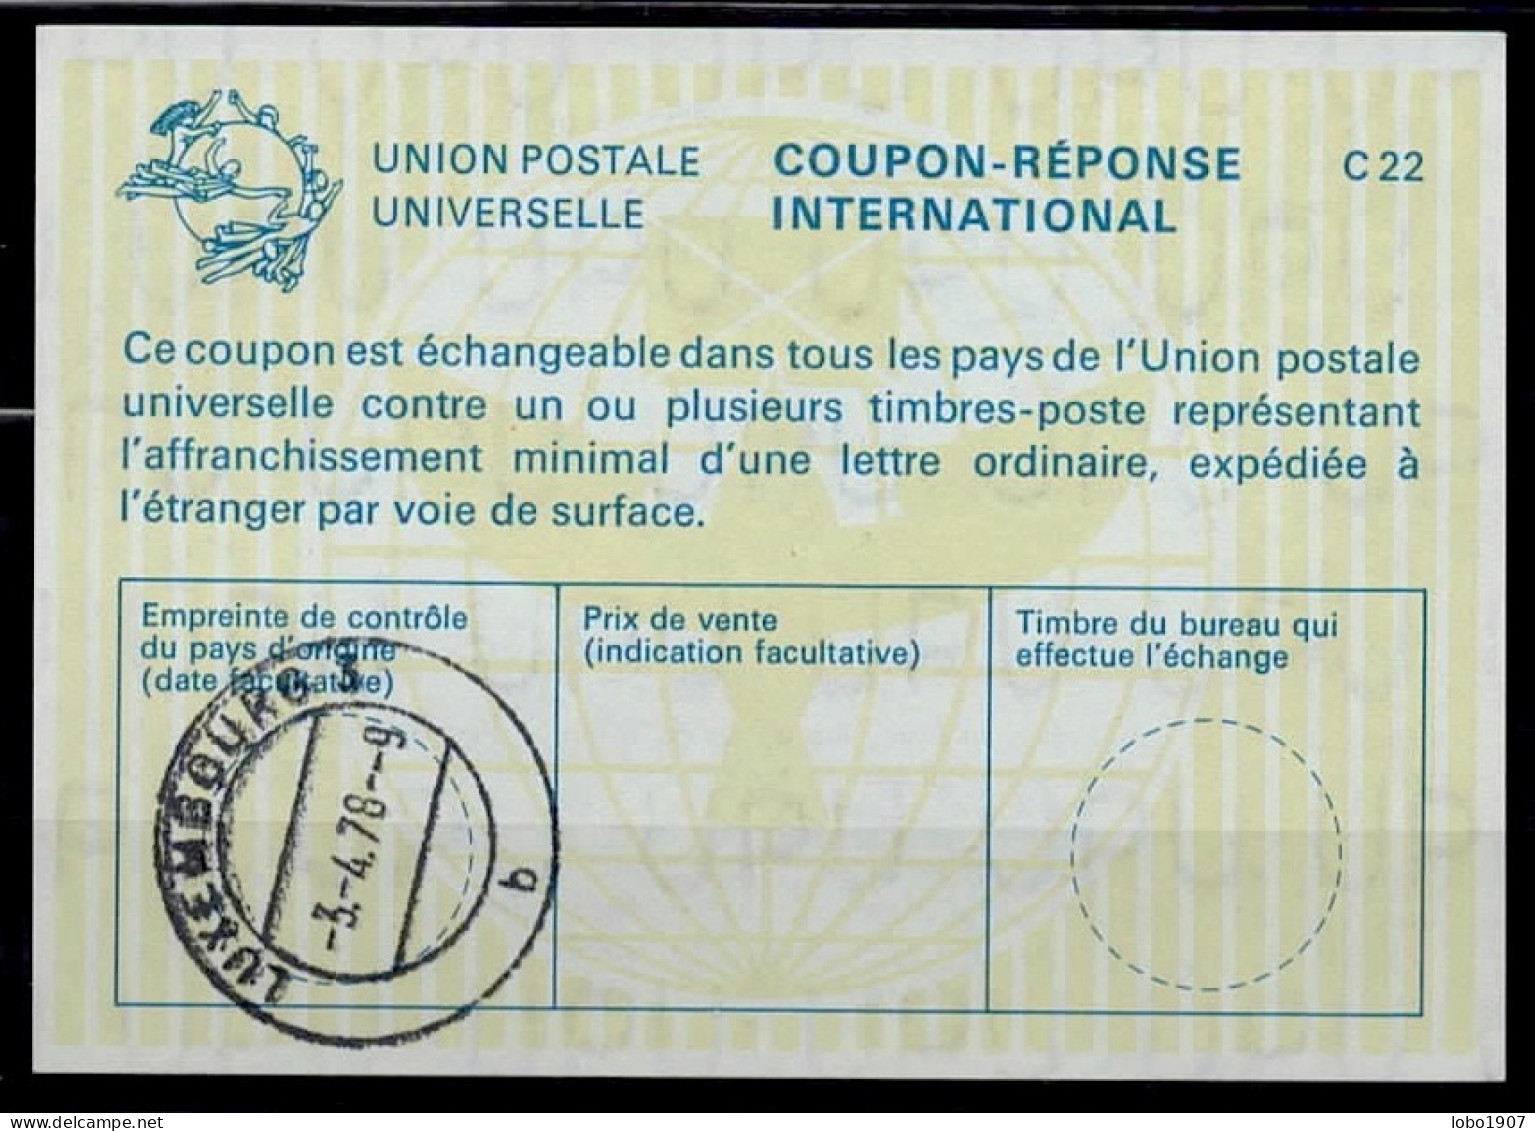 LUXEMBOURG  Collection of 17 International Reply Coupon Reponse Antwortschein IRC IAS  see list and scans